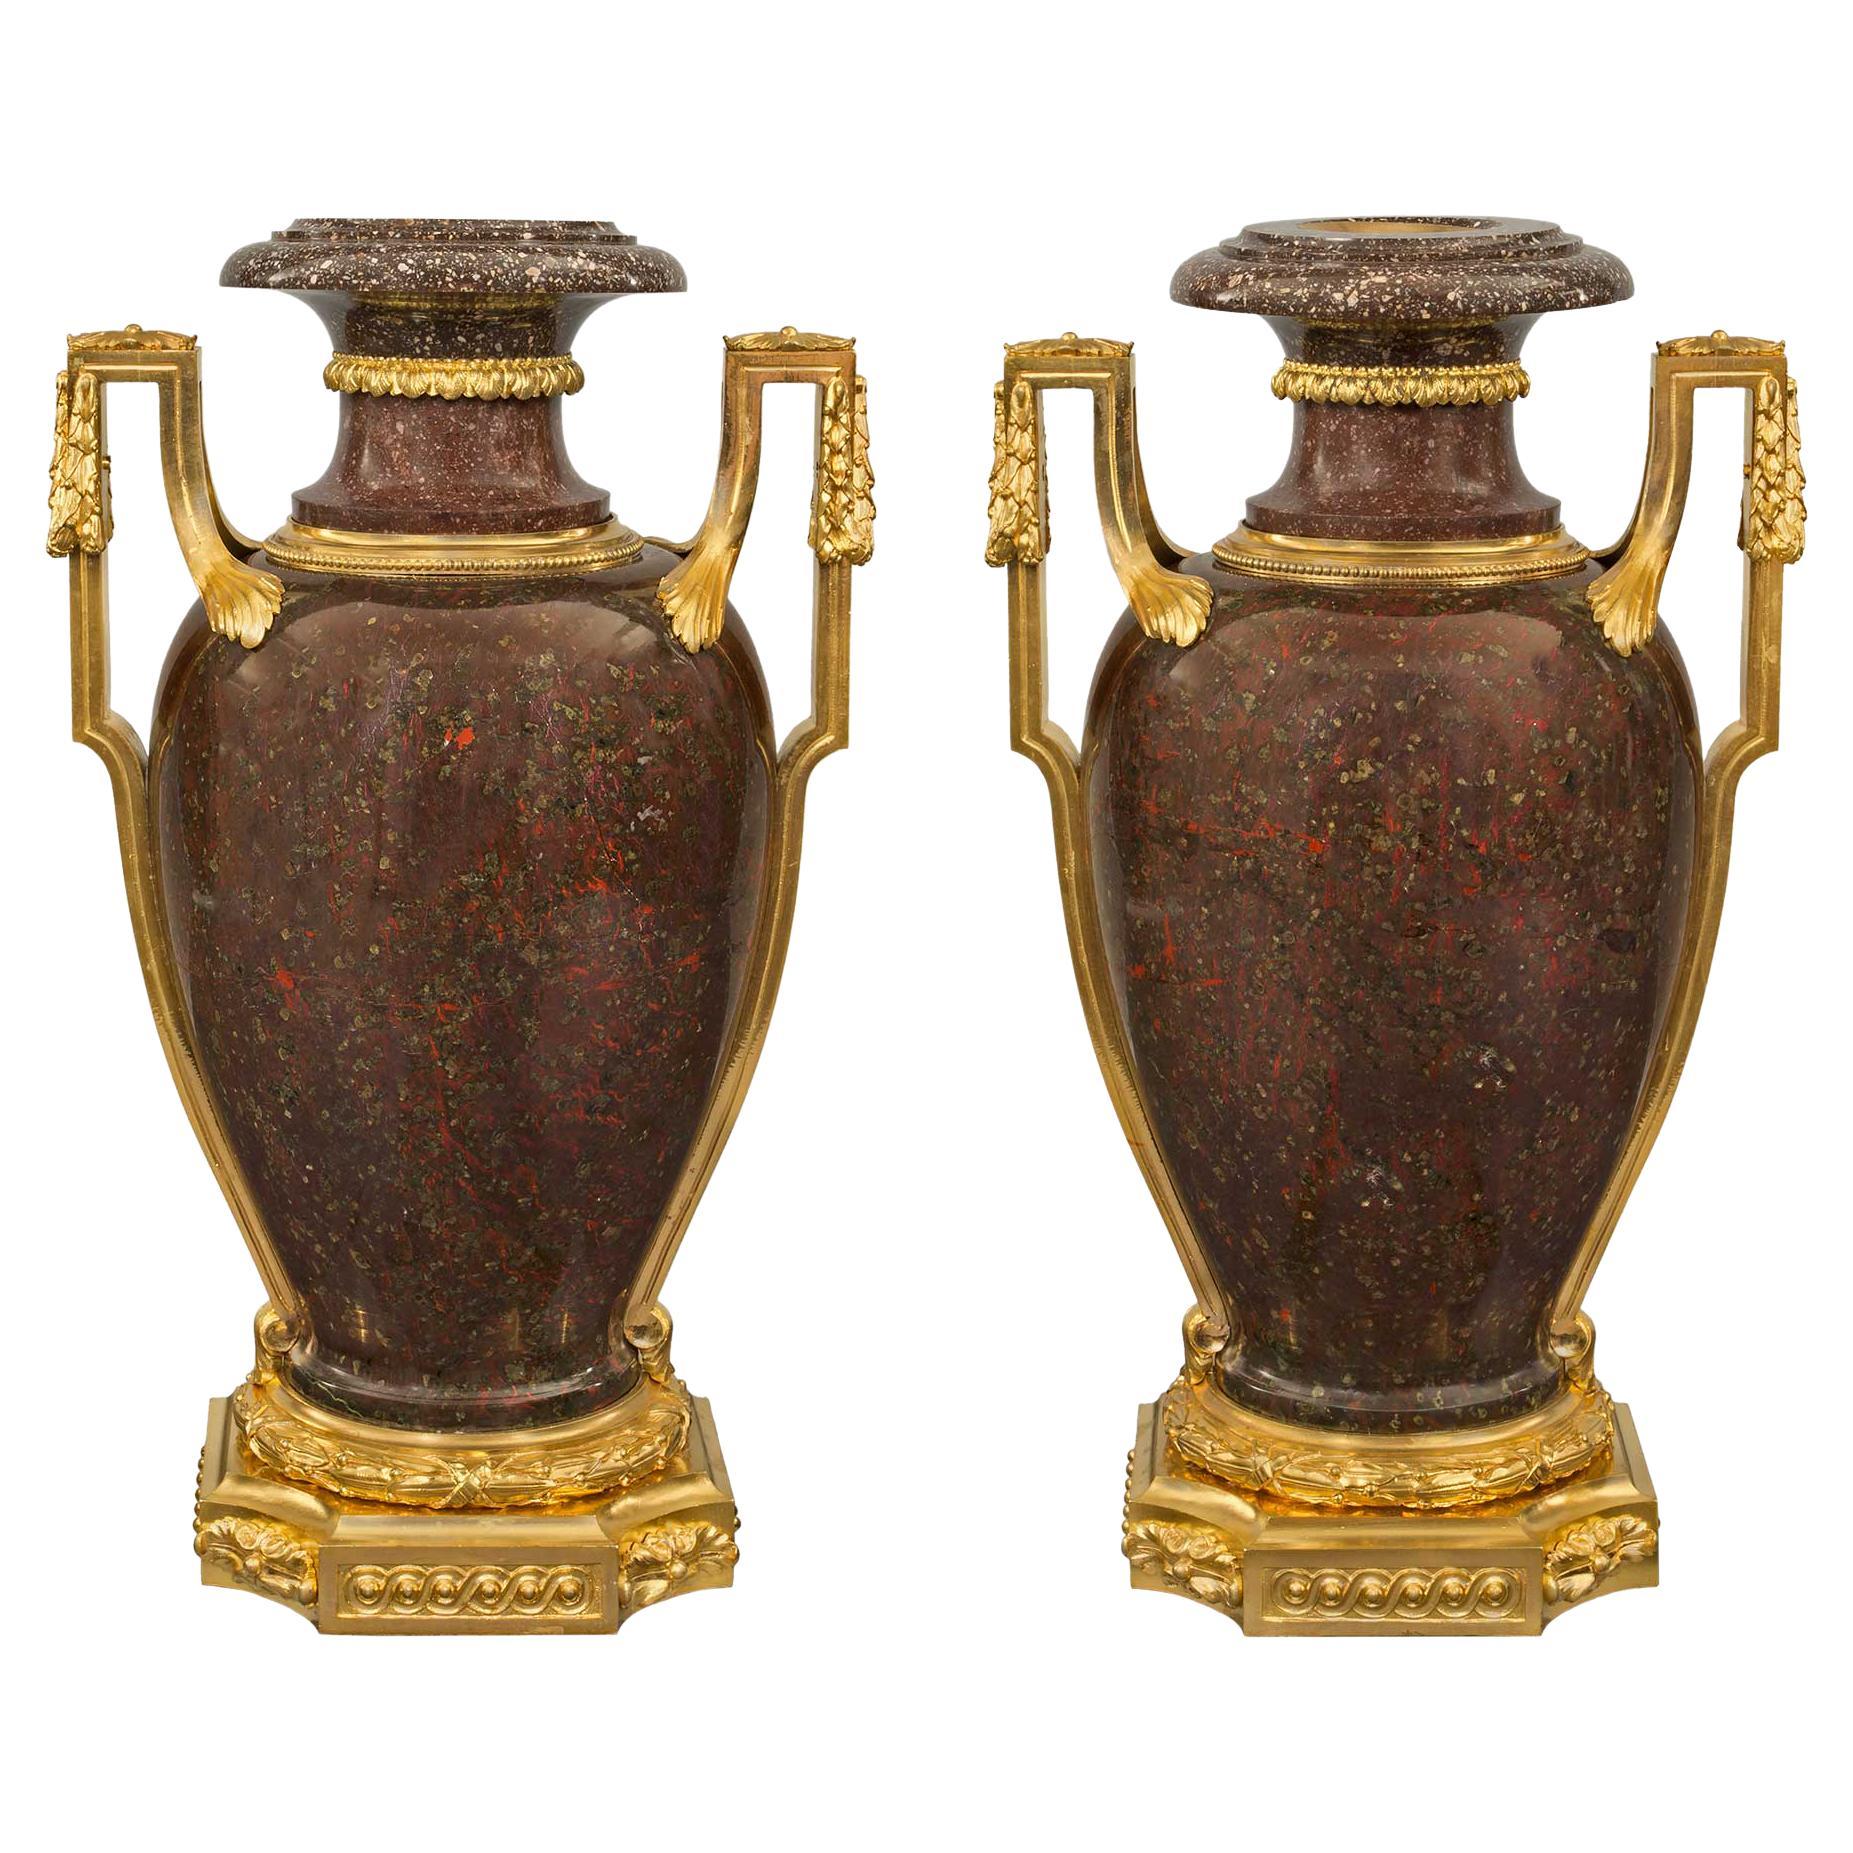 French Early 19th Century Louis XVI Style Porphyry and Ormolu Urns